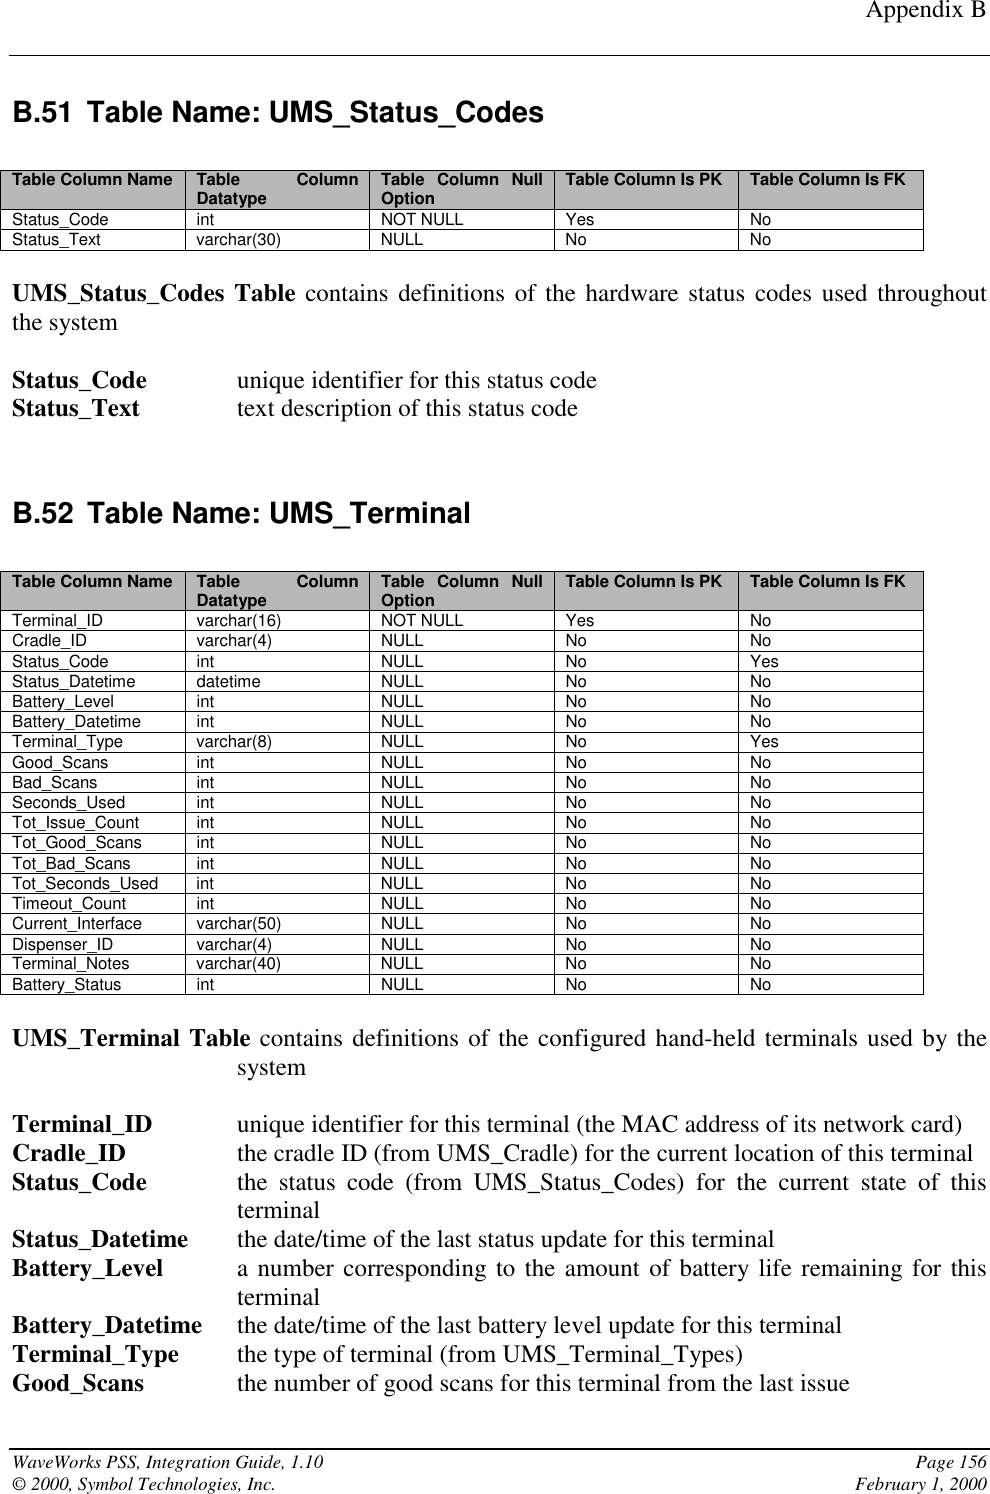 Appendix BWaveWorks PSS, Integration Guide, 1.10 Page 156© 2000, Symbol Technologies, Inc. February 1, 2000B.51 Table Name: UMS_Status_CodesTable Column Name Table ColumnDatatype Table Column NullOption Table Column Is PK Table Column Is FKStatus_Code int NOT NULL Yes NoStatus_Text varchar(30) NULL No NoUMS_Status_Codes Table contains definitions of the hardware status codes used throughoutthe systemStatus_Code unique identifier for this status codeStatus_Text text description of this status codeB.52 Table Name: UMS_TerminalTable Column Name Table ColumnDatatype Table Column NullOption Table Column Is PK Table Column Is FKTerminal_ID varchar(16) NOT NULL Yes NoCradle_ID varchar(4) NULL No NoStatus_Code int NULL No YesStatus_Datetime datetime NULL No NoBattery_Level int NULL No NoBattery_Datetime int NULL No NoTerminal_Type varchar(8) NULL No YesGood_Scans int NULL No NoBad_Scans int NULL No NoSeconds_Used int NULL No NoTot_Issue_Count int NULL No NoTot_Good_Scans int NULL No NoTot_Bad_Scans int NULL No NoTot_Seconds_Used int NULL No NoTimeout_Count int NULL No NoCurrent_Interface varchar(50) NULL No NoDispenser_ID varchar(4) NULL No NoTerminal_Notes varchar(40) NULL No NoBattery_Status int NULL No NoUMS_Terminal Table contains definitions of the configured hand-held terminals used by thesystemTerminal_ID unique identifier for this terminal (the MAC address of its network card)Cradle_ID the cradle ID (from UMS_Cradle) for the current location of this terminalStatus_Code the status code (from UMS_Status_Codes) for the current state of thisterminalStatus_Datetime the date/time of the last status update for this terminalBattery_Level a number corresponding to the amount of battery life remaining for thisterminalBattery_Datetime the date/time of the last battery level update for this terminalTerminal_Type the type of terminal (from UMS_Terminal_Types)Good_Scans the number of good scans for this terminal from the last issue